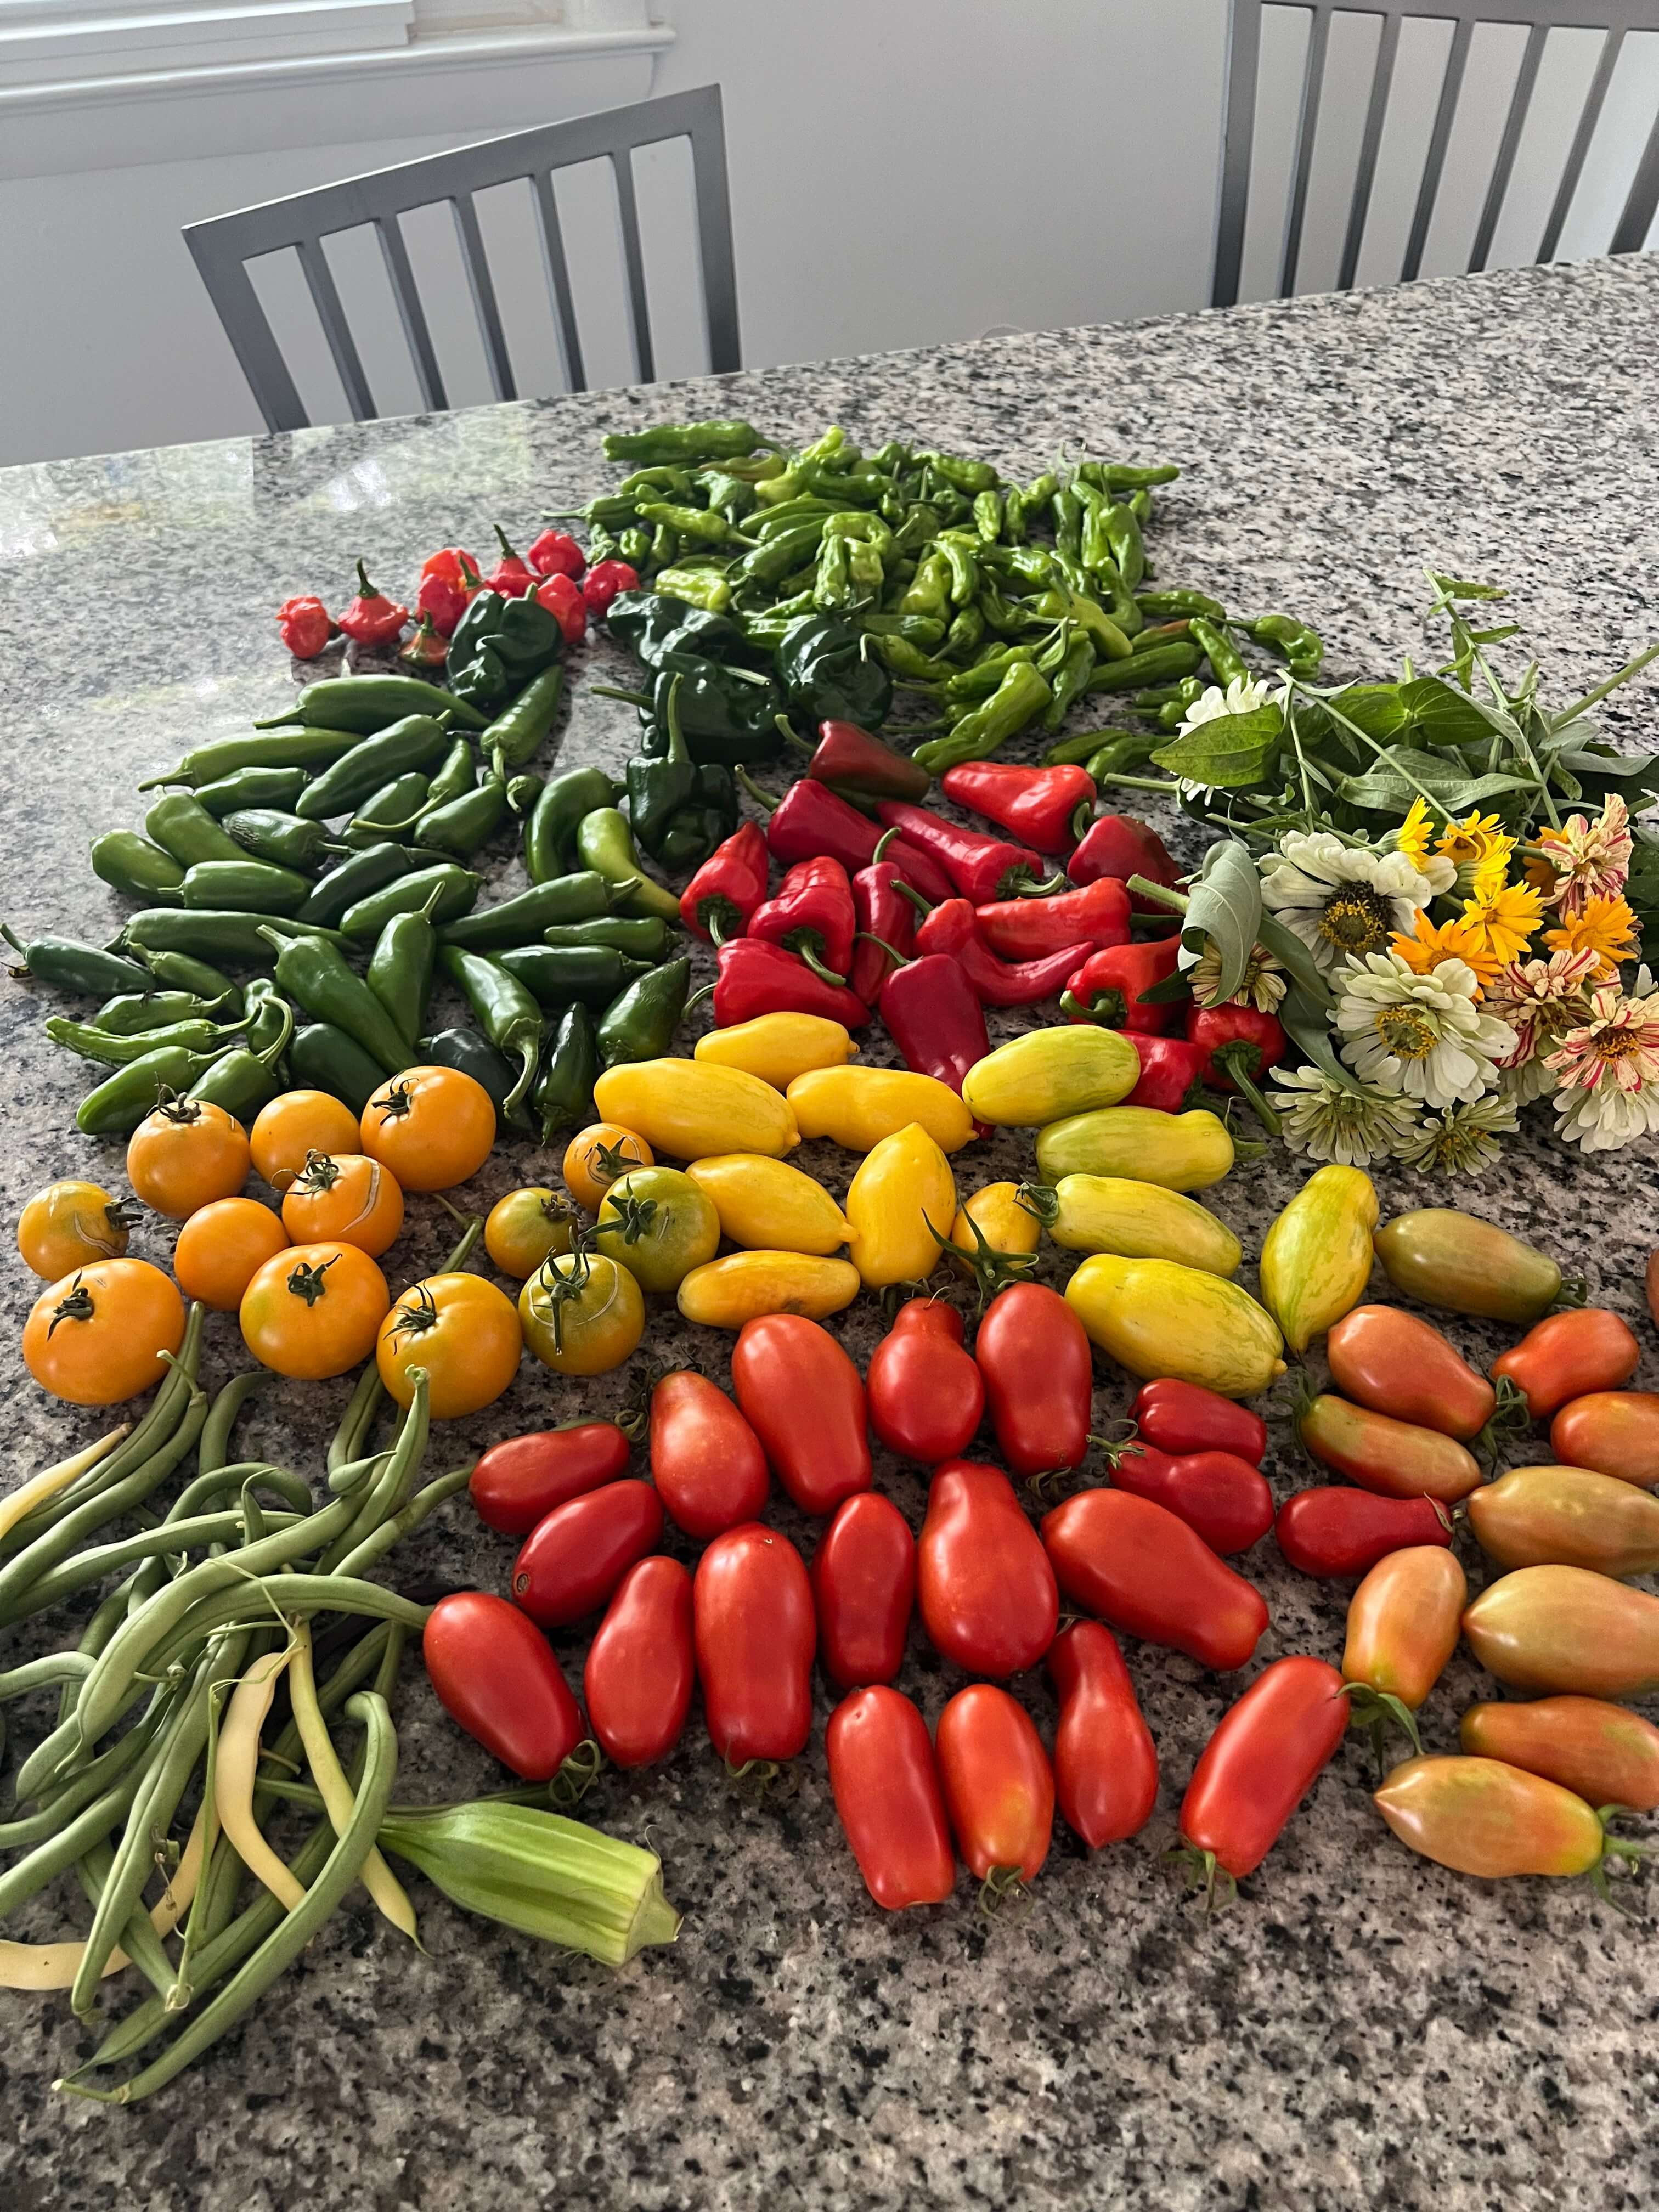 A gray and white granite island is spilling over with garden produce. Yellow, orange, and red tomatoes are joined by an okra pod, green and yellow pole beans, zinnias, and multiple varieties of peppers.